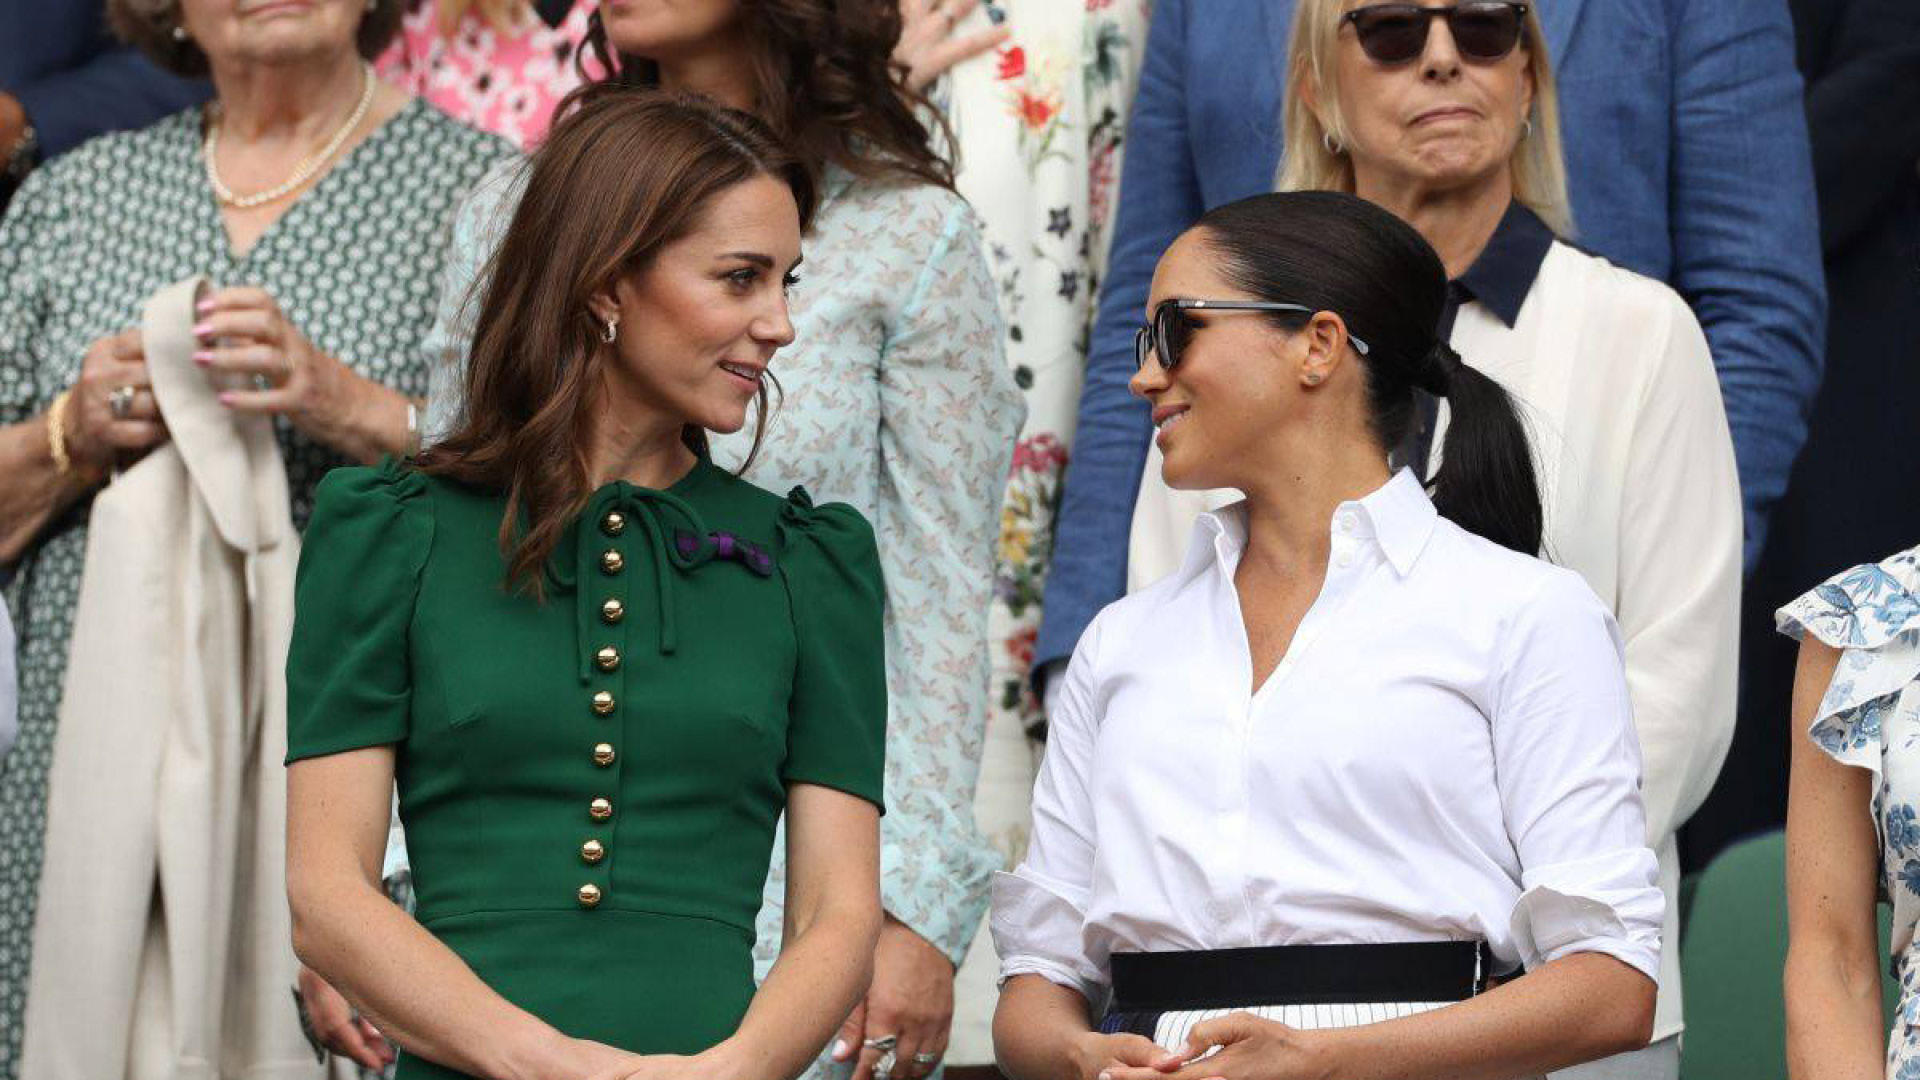 Inside Meghan Markle And Kate Middleton's Girls' Day Out At Wimbledon ...